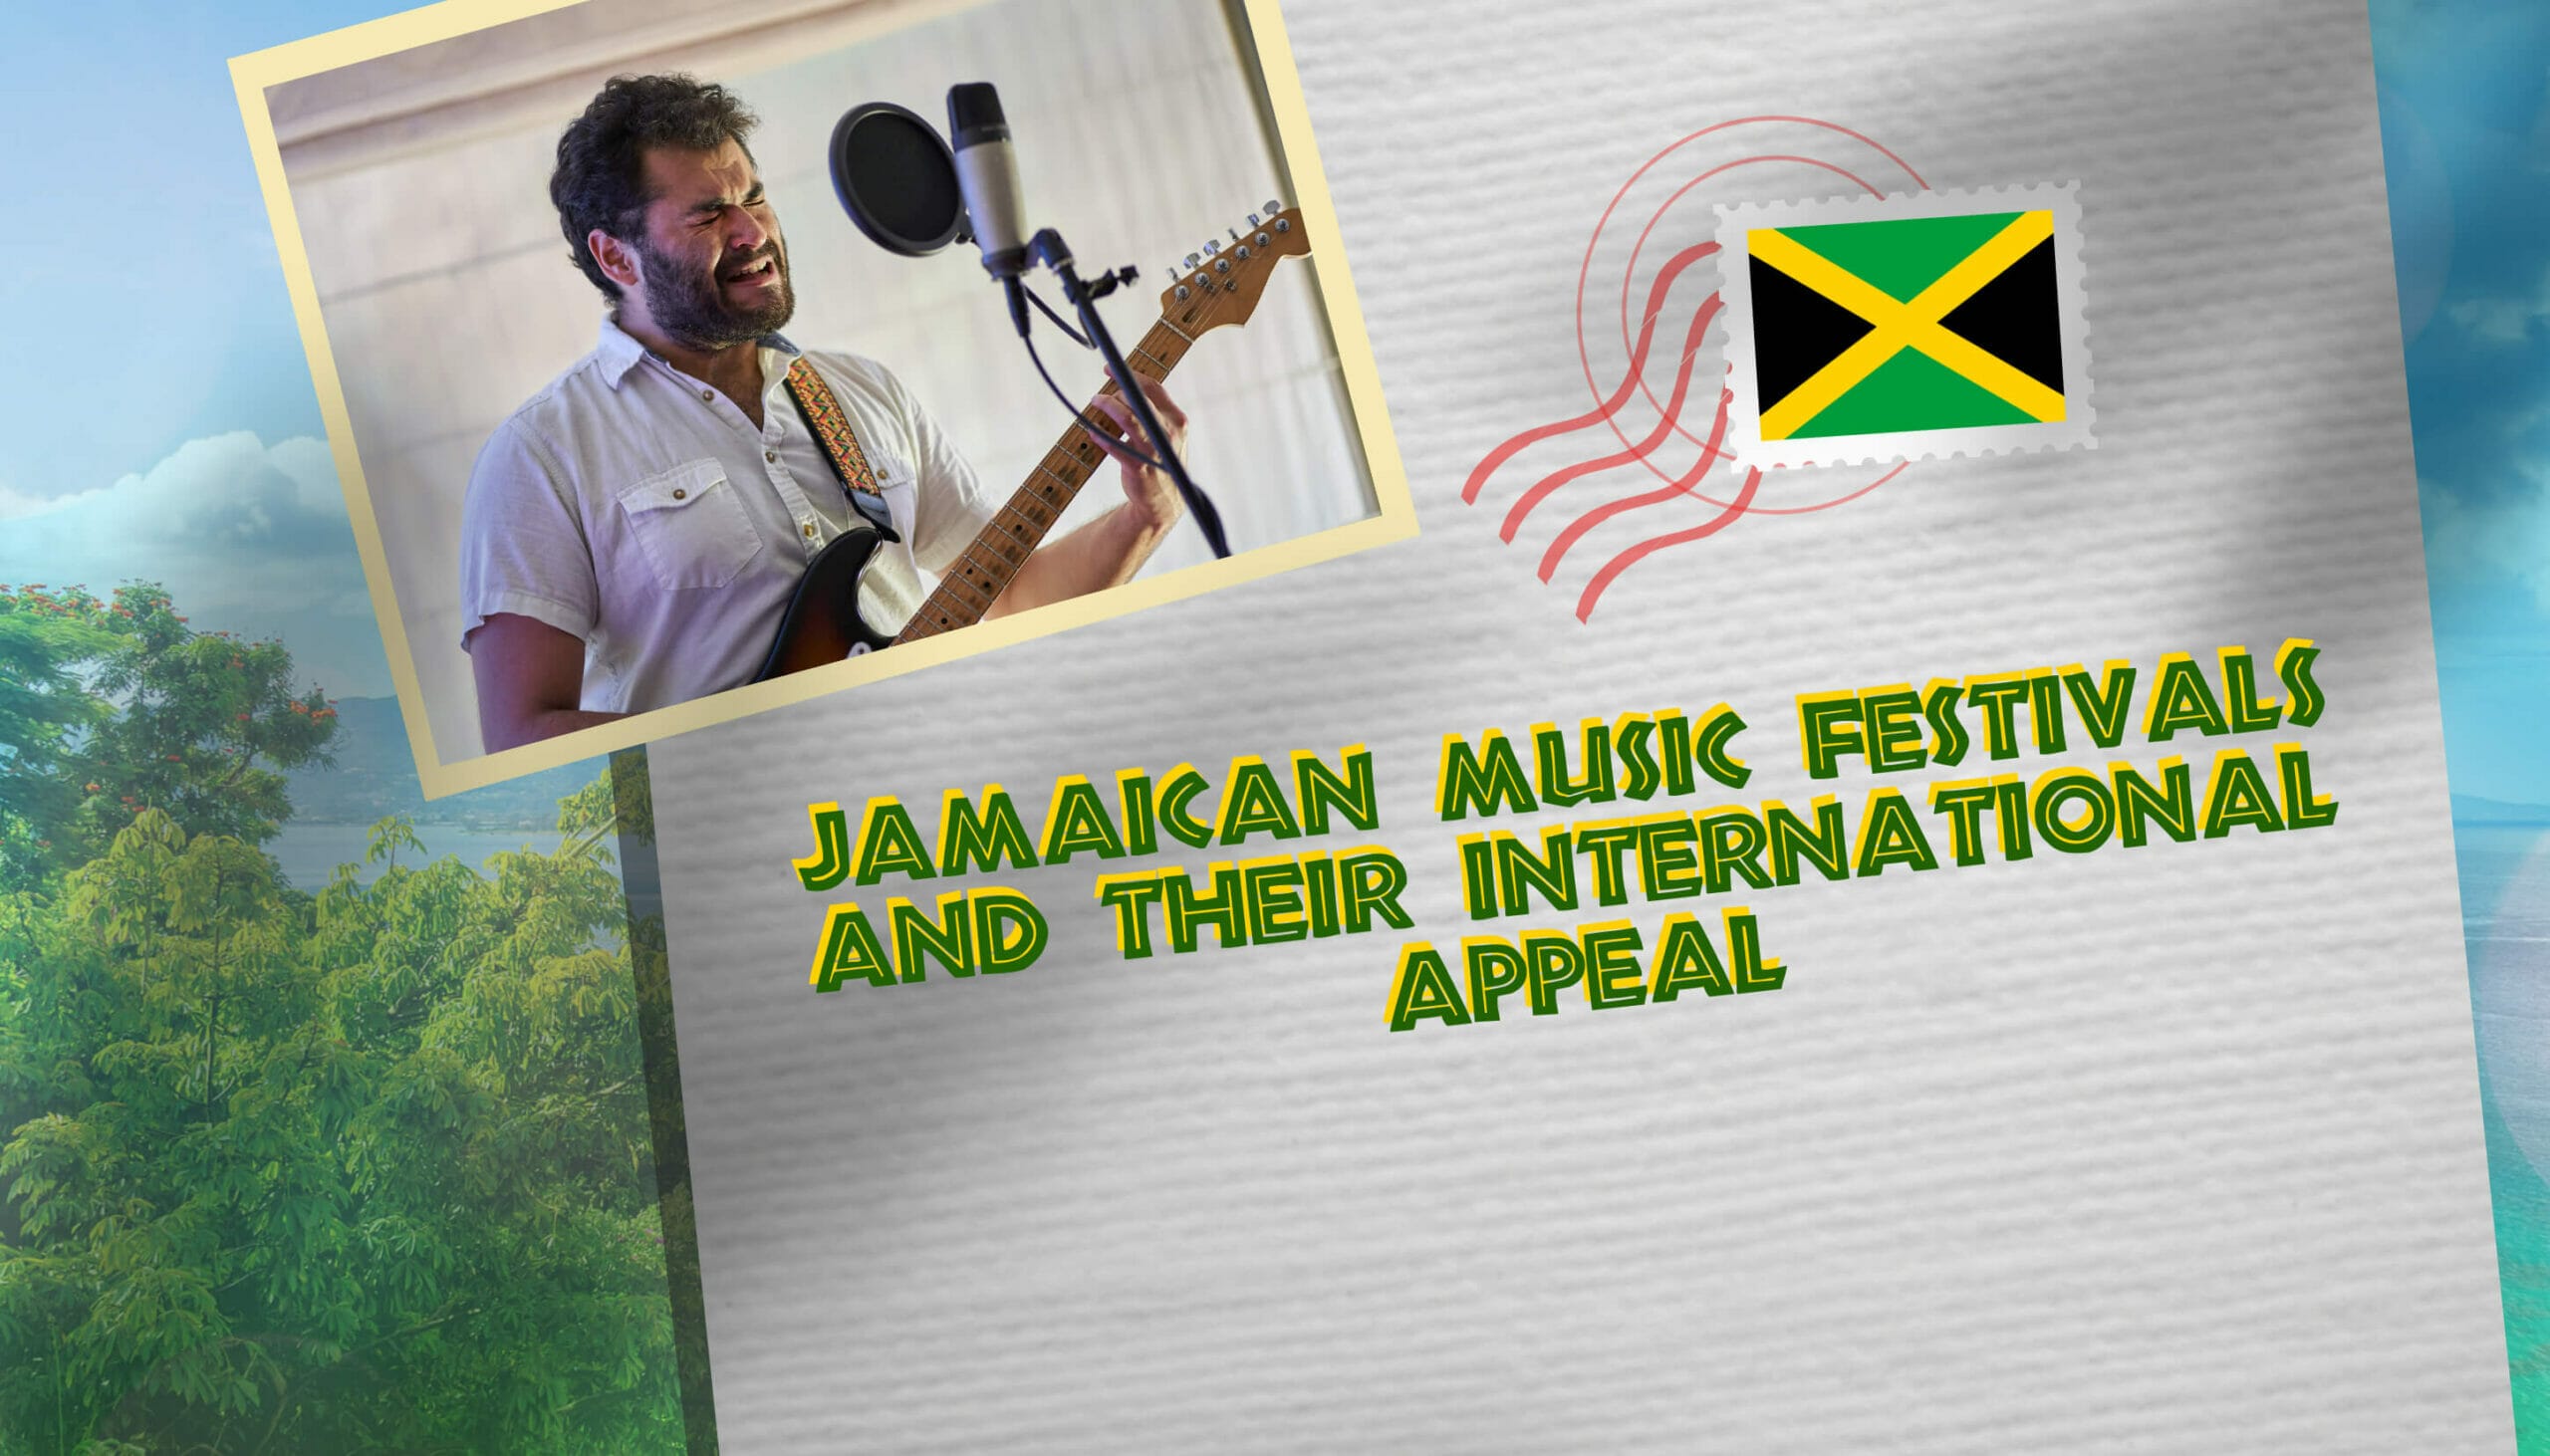 Jamaican music festivals and their international appeal